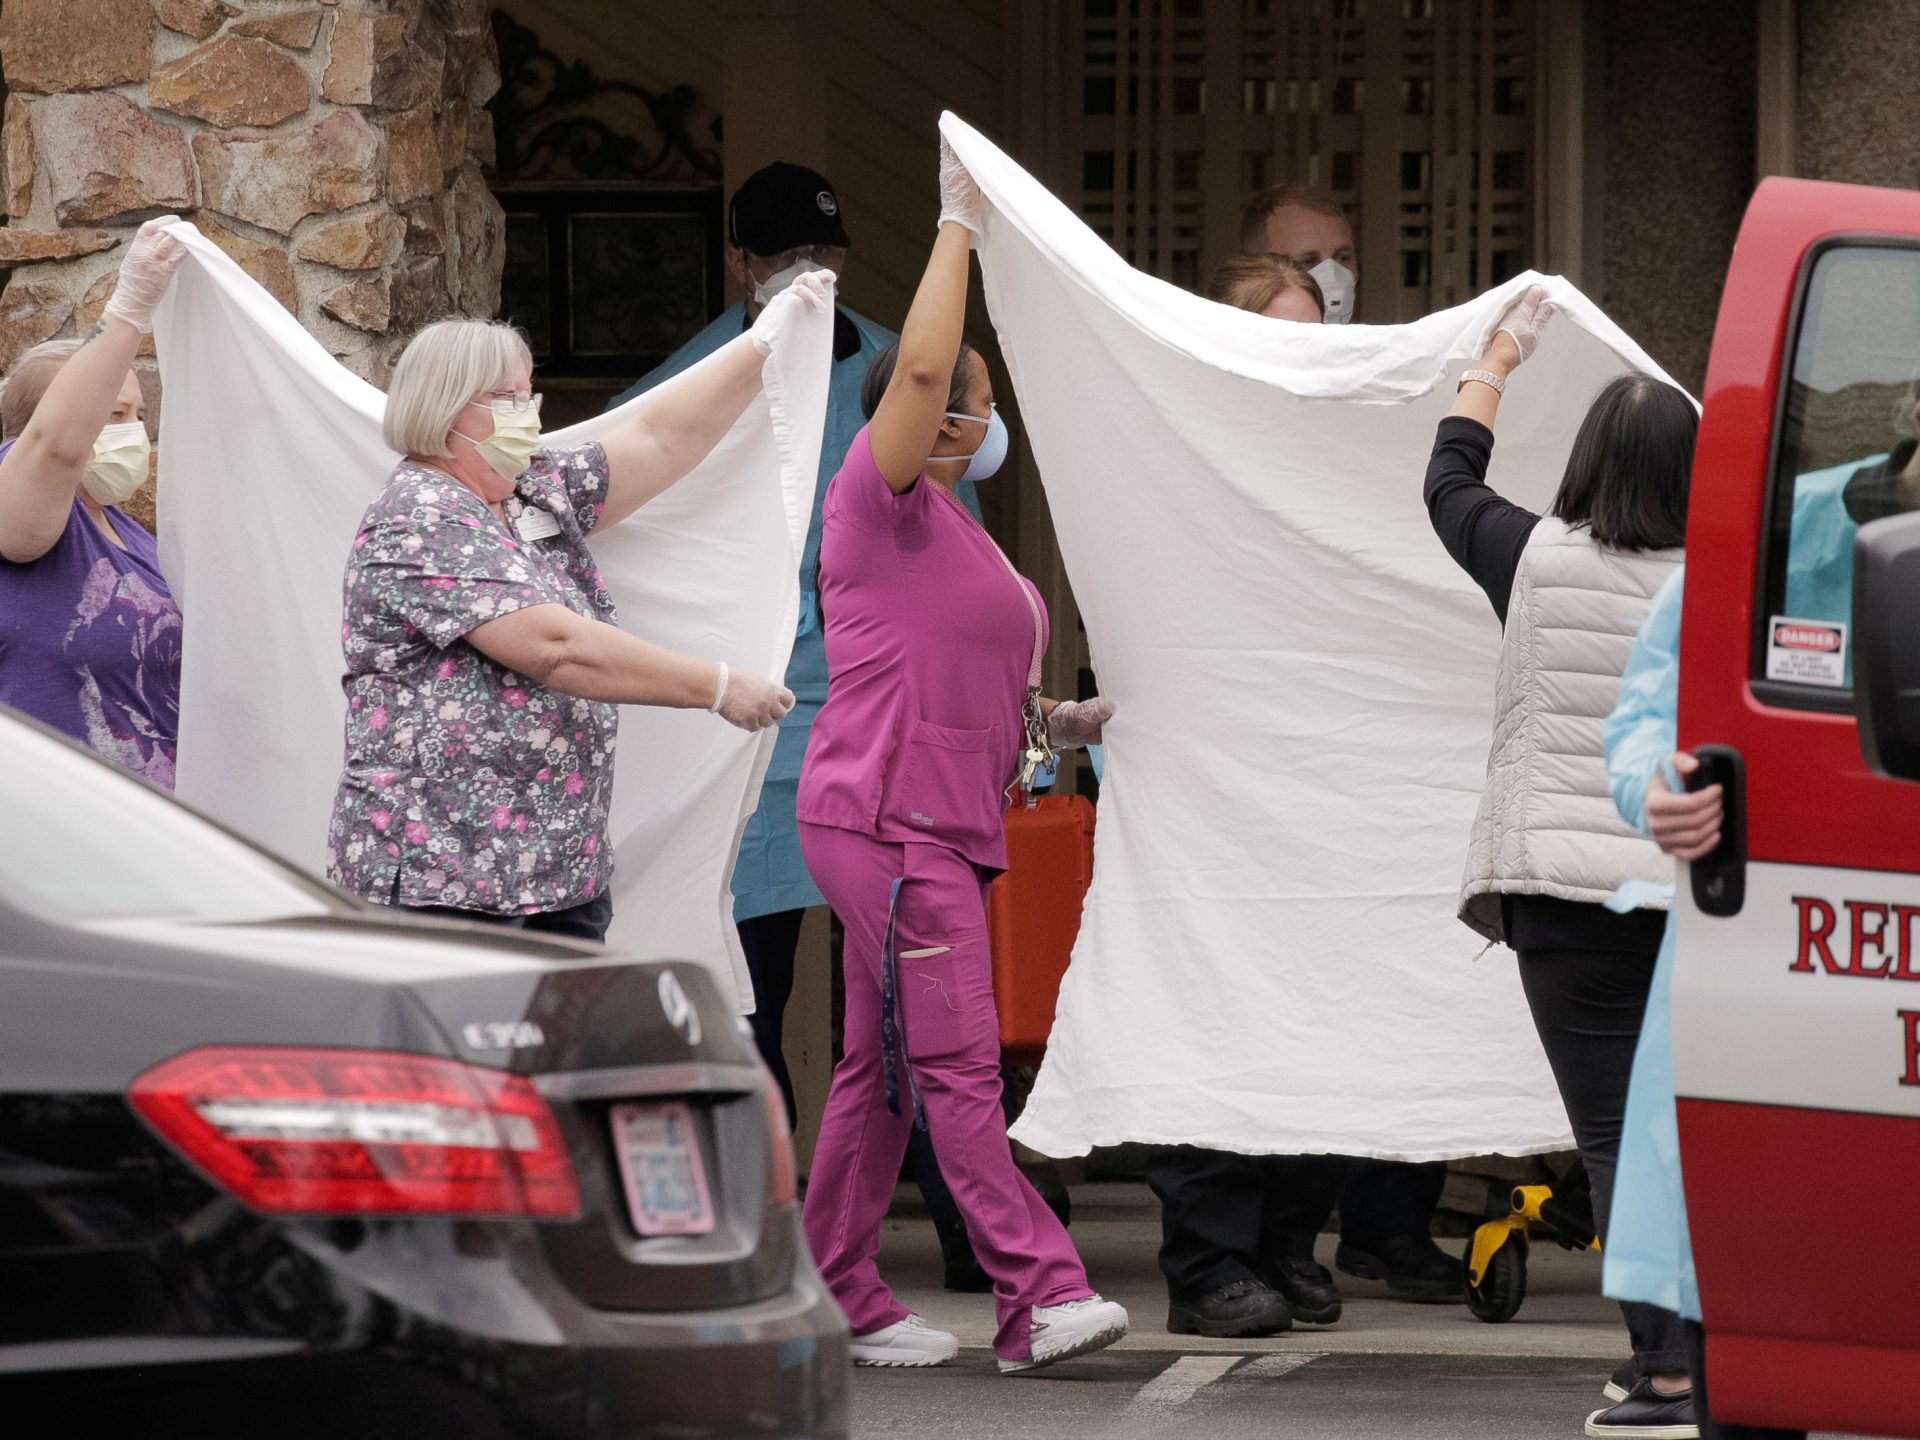 Health care workers transfer a patient to an ambulance at the Life Care Center of Kirkland, Wash., the long-term care facility where the two people who had posthumous diagnoses of COVID-19 had lived.